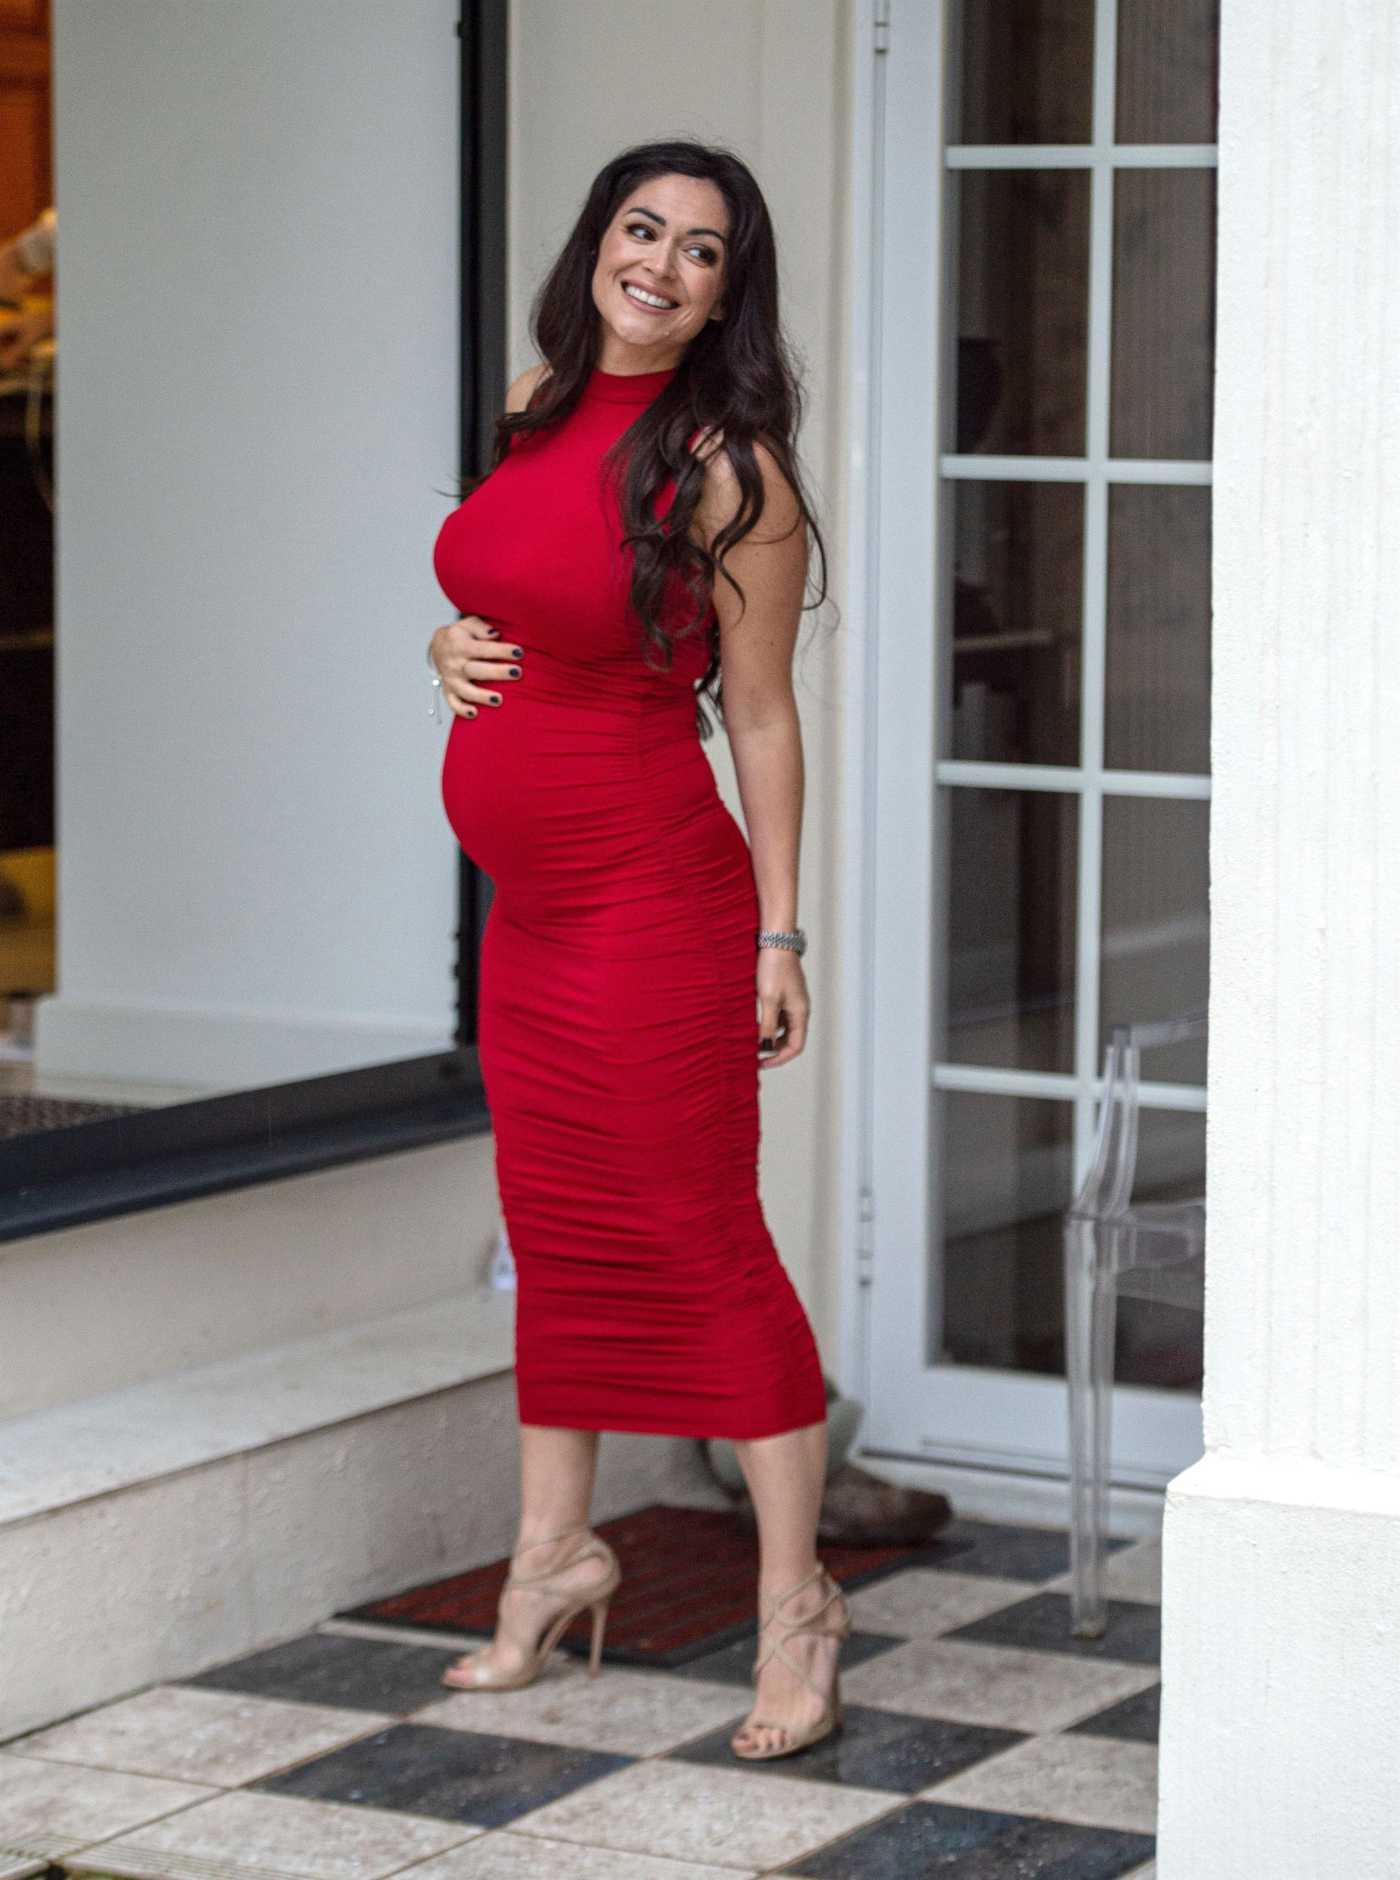 Casey Batchelor in a Red Dress Arrives at a Photoshoot in London 02/16/2021